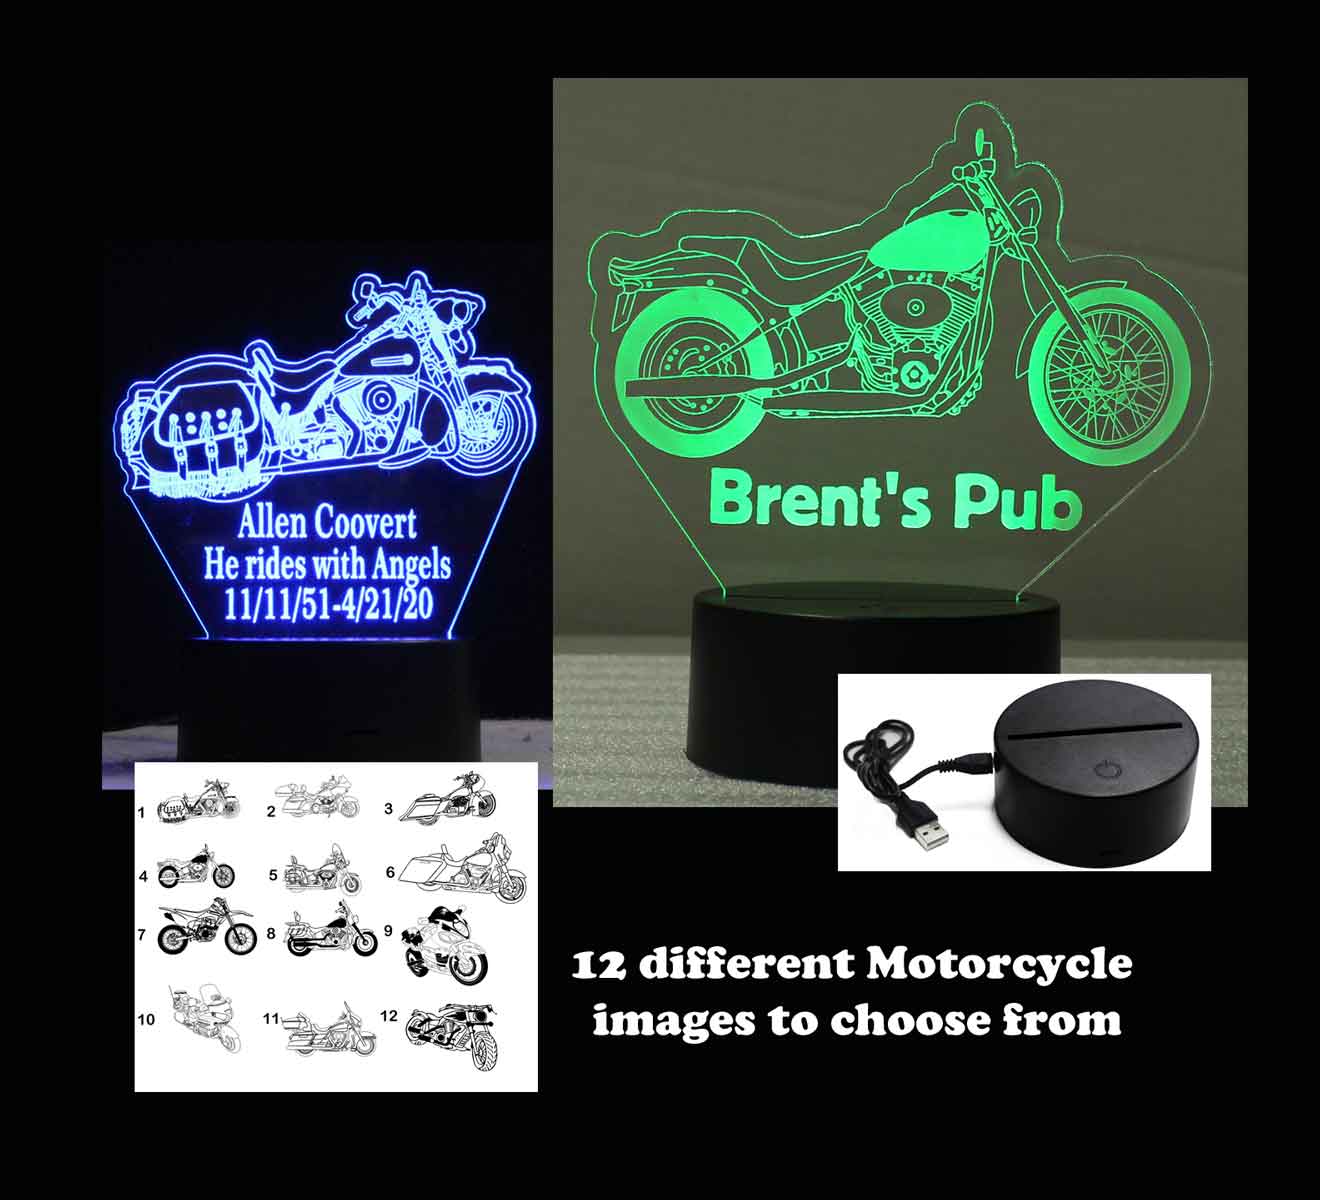 Personalized Motorcycle Table Top night light  USB/battery/110V/110V/240V battery operated Motorcycle night light